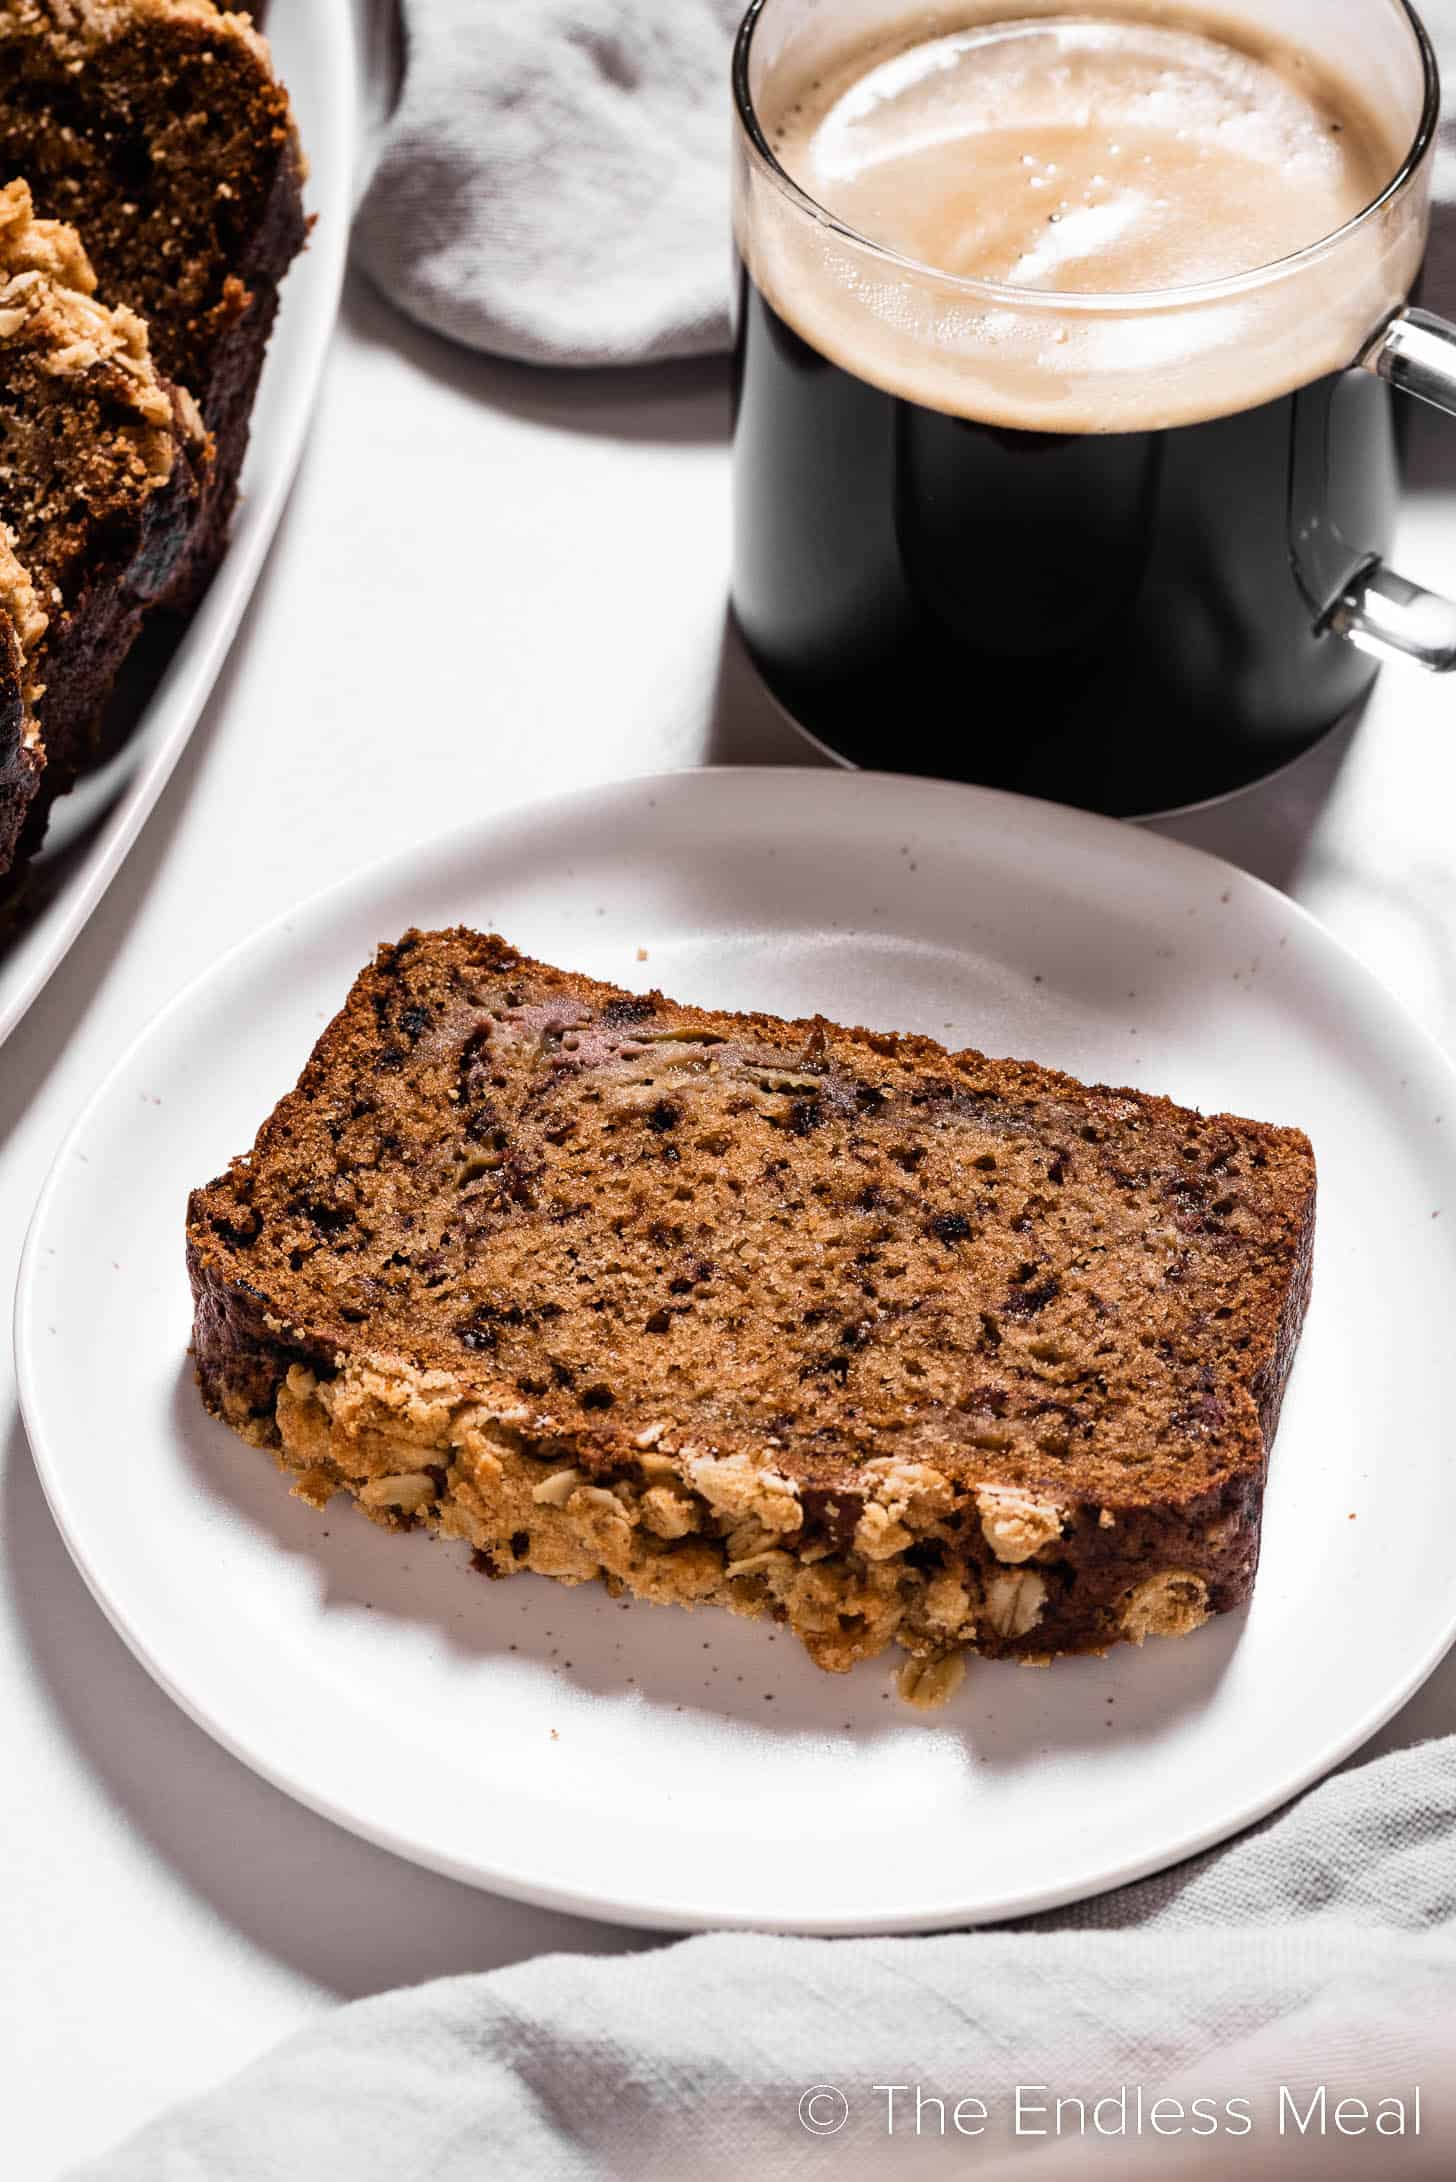 Coffee cake banana bread next to a cup of coffee.